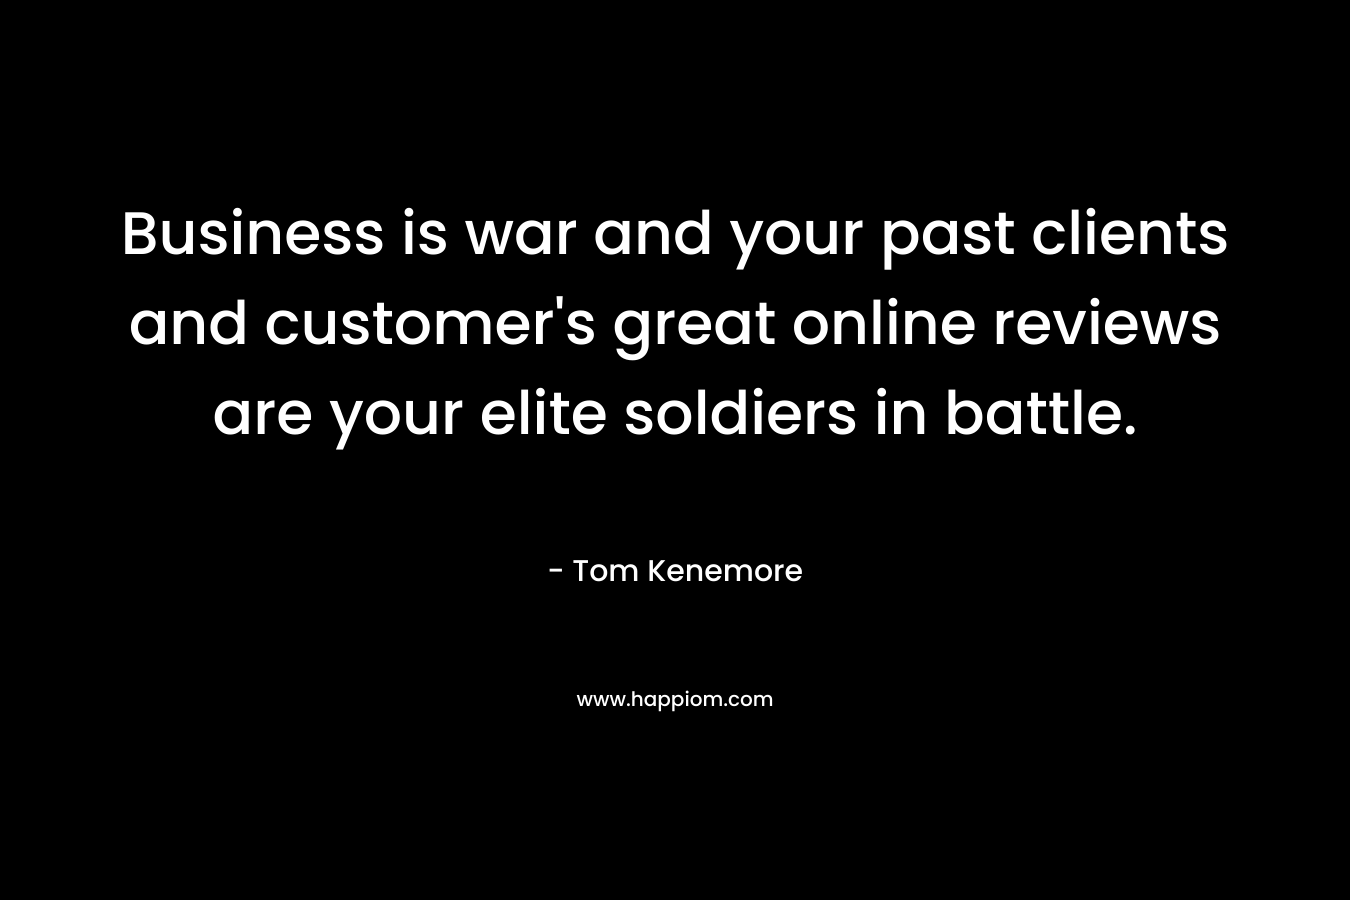 Business is war and your past clients and customer’s great online reviews are your elite soldiers in battle. – Tom Kenemore